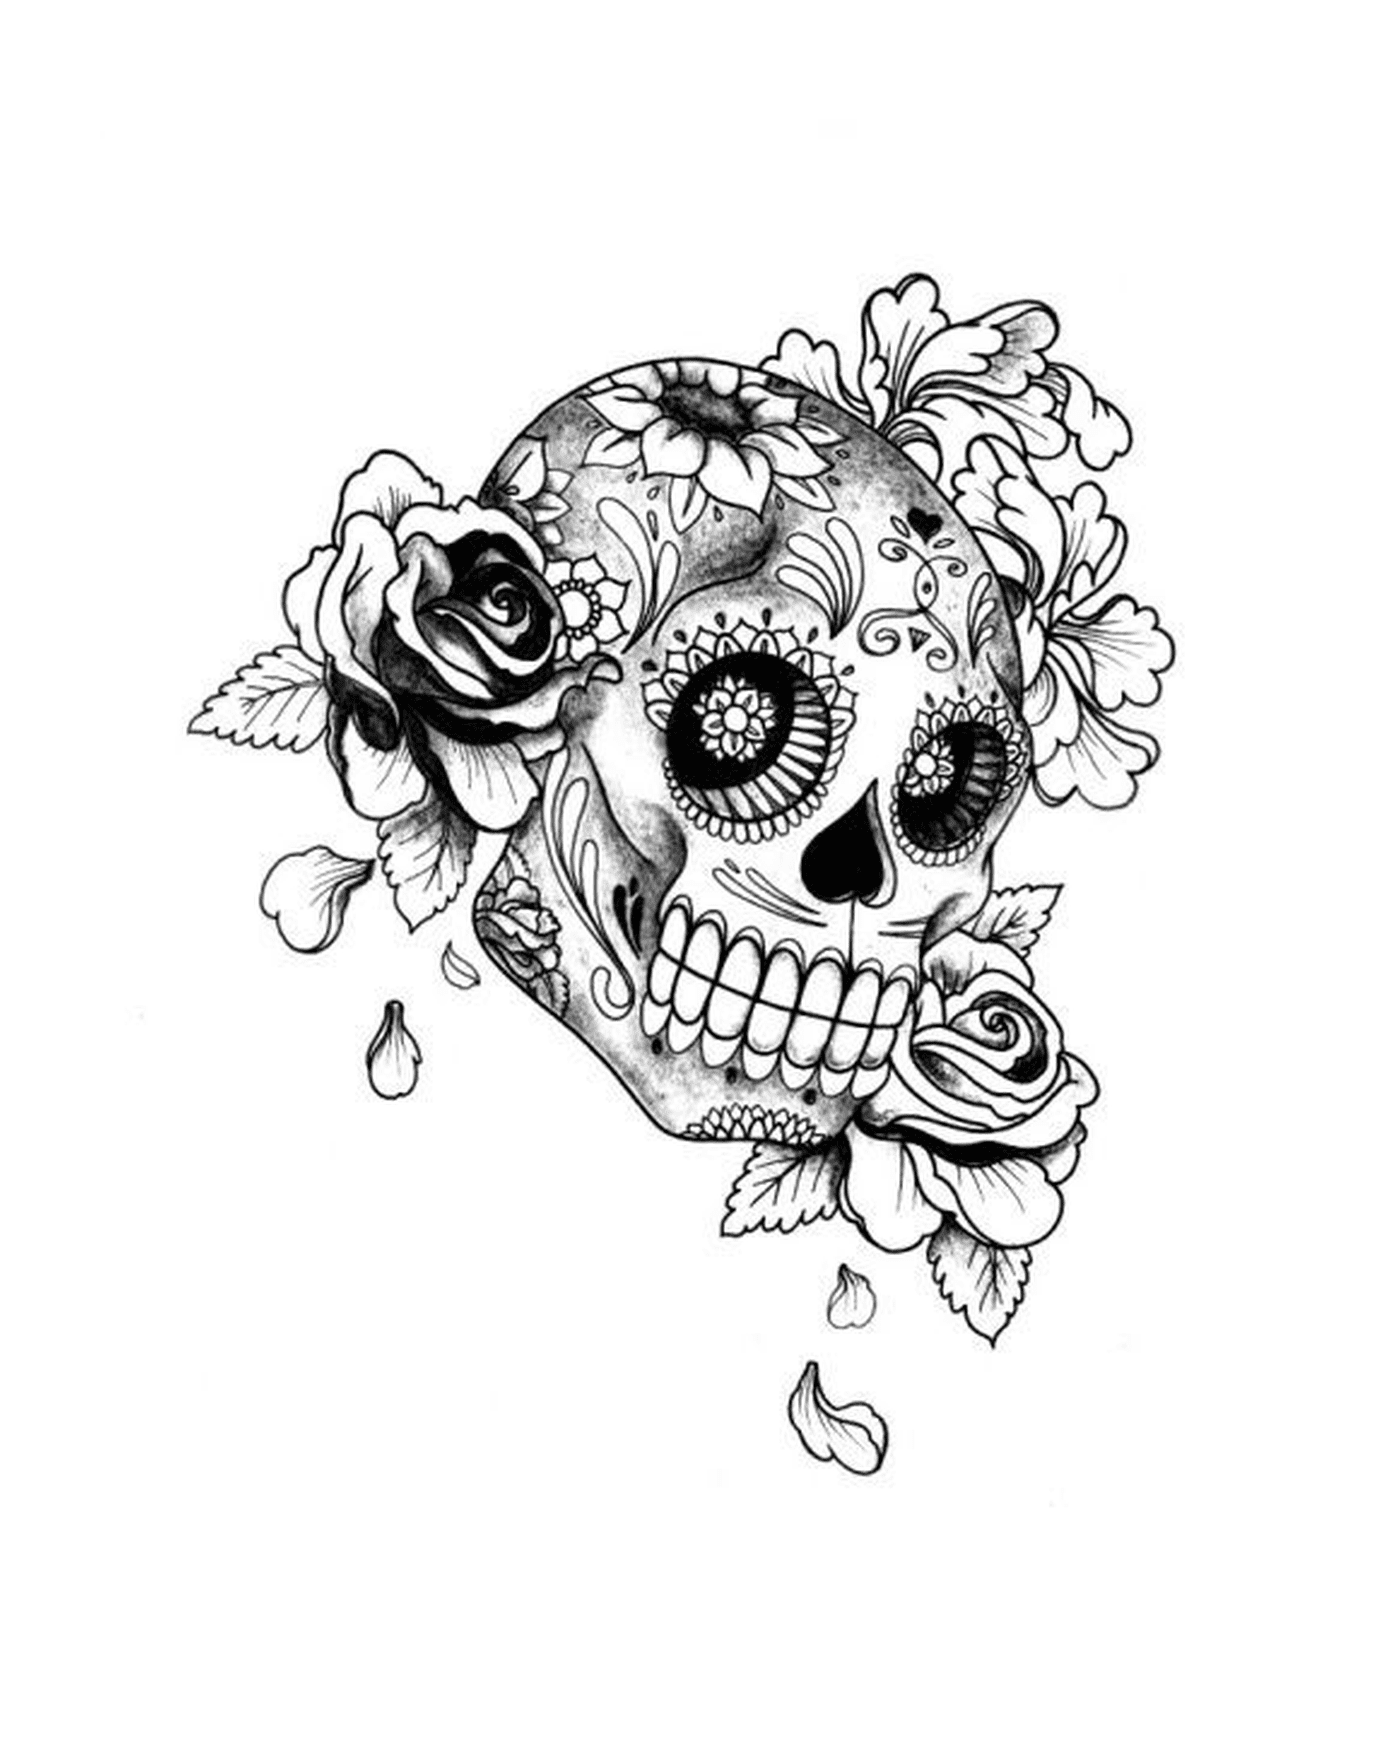  Skull with roses 